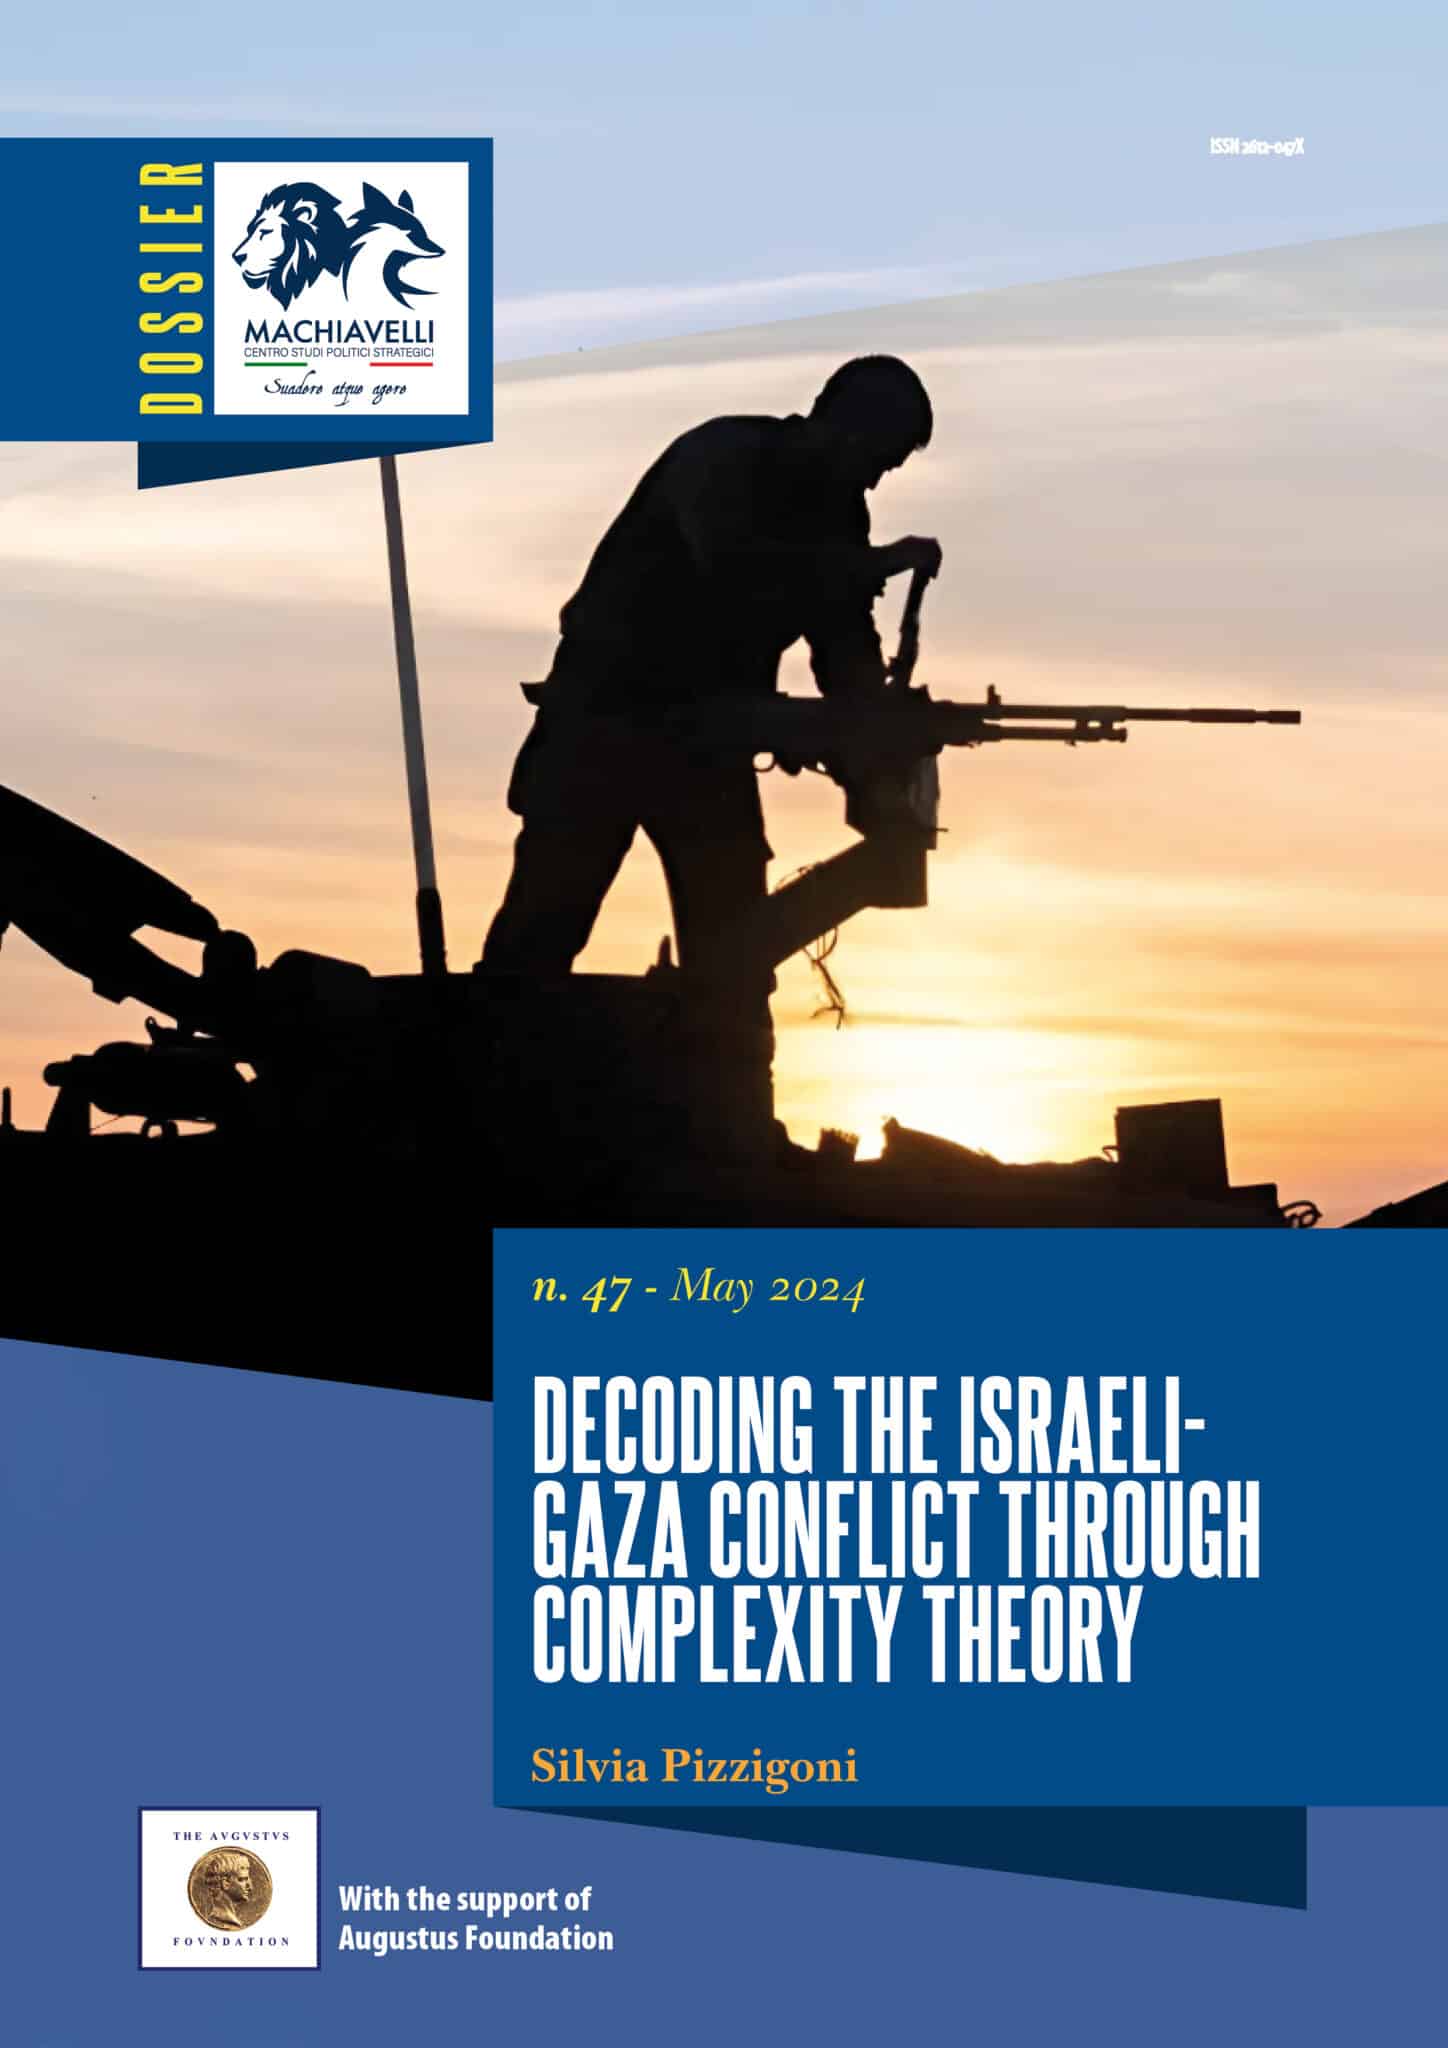 Dossier 47 - Decoding the Israeli-Gaza conflict through complexity theory